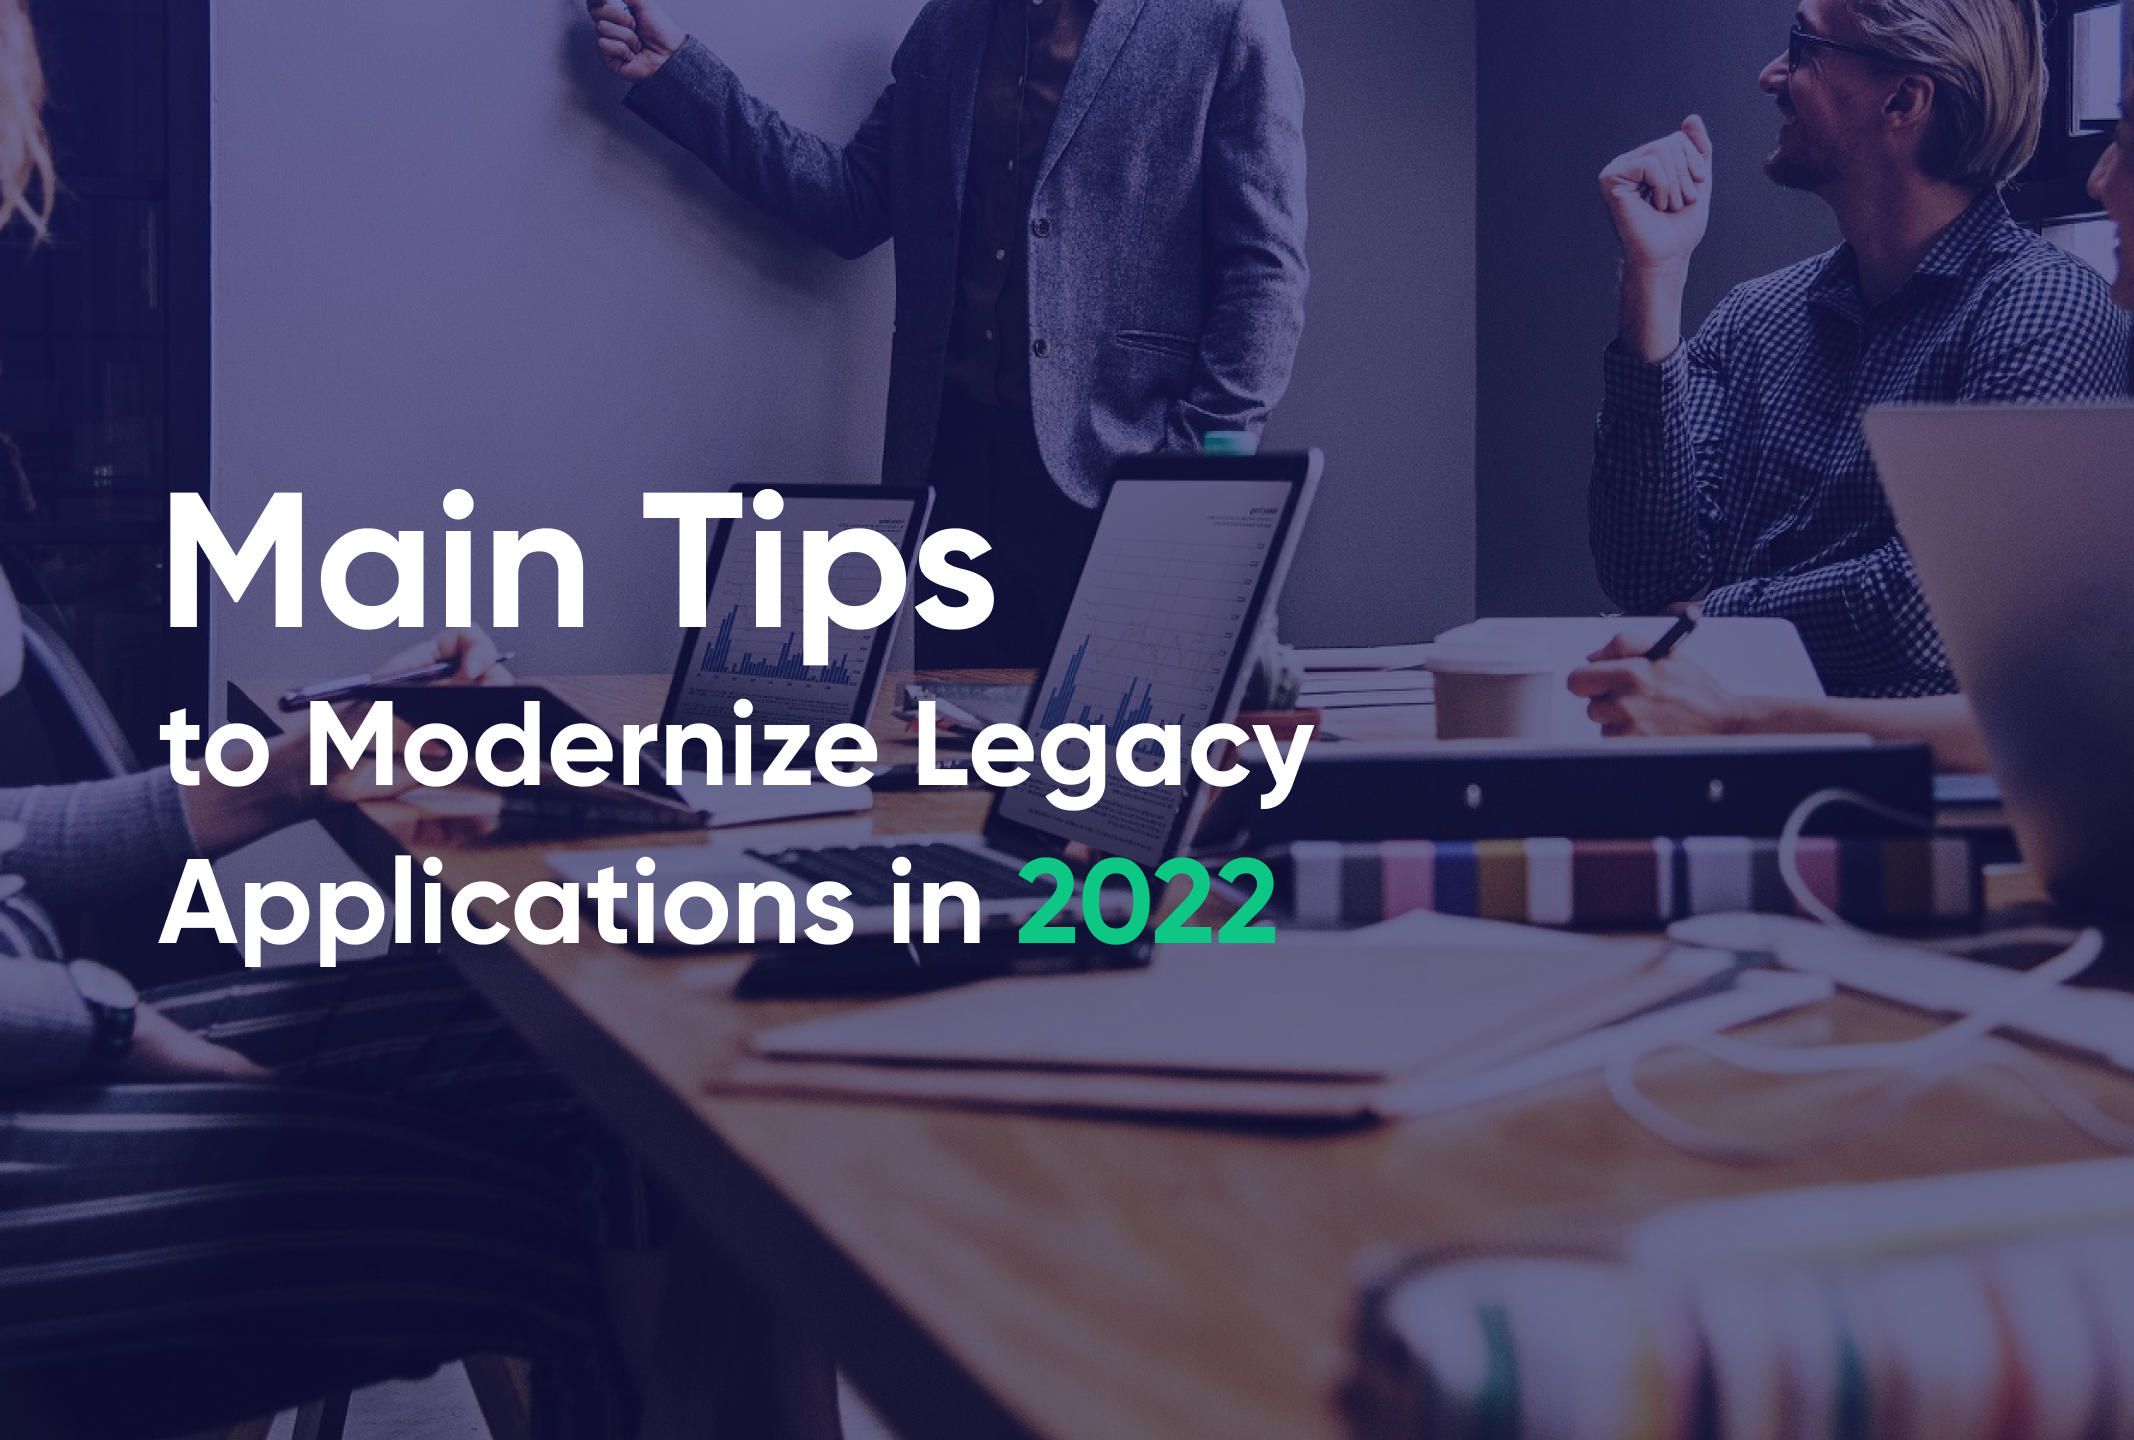 Main tips to modernize legacy applications in 2022